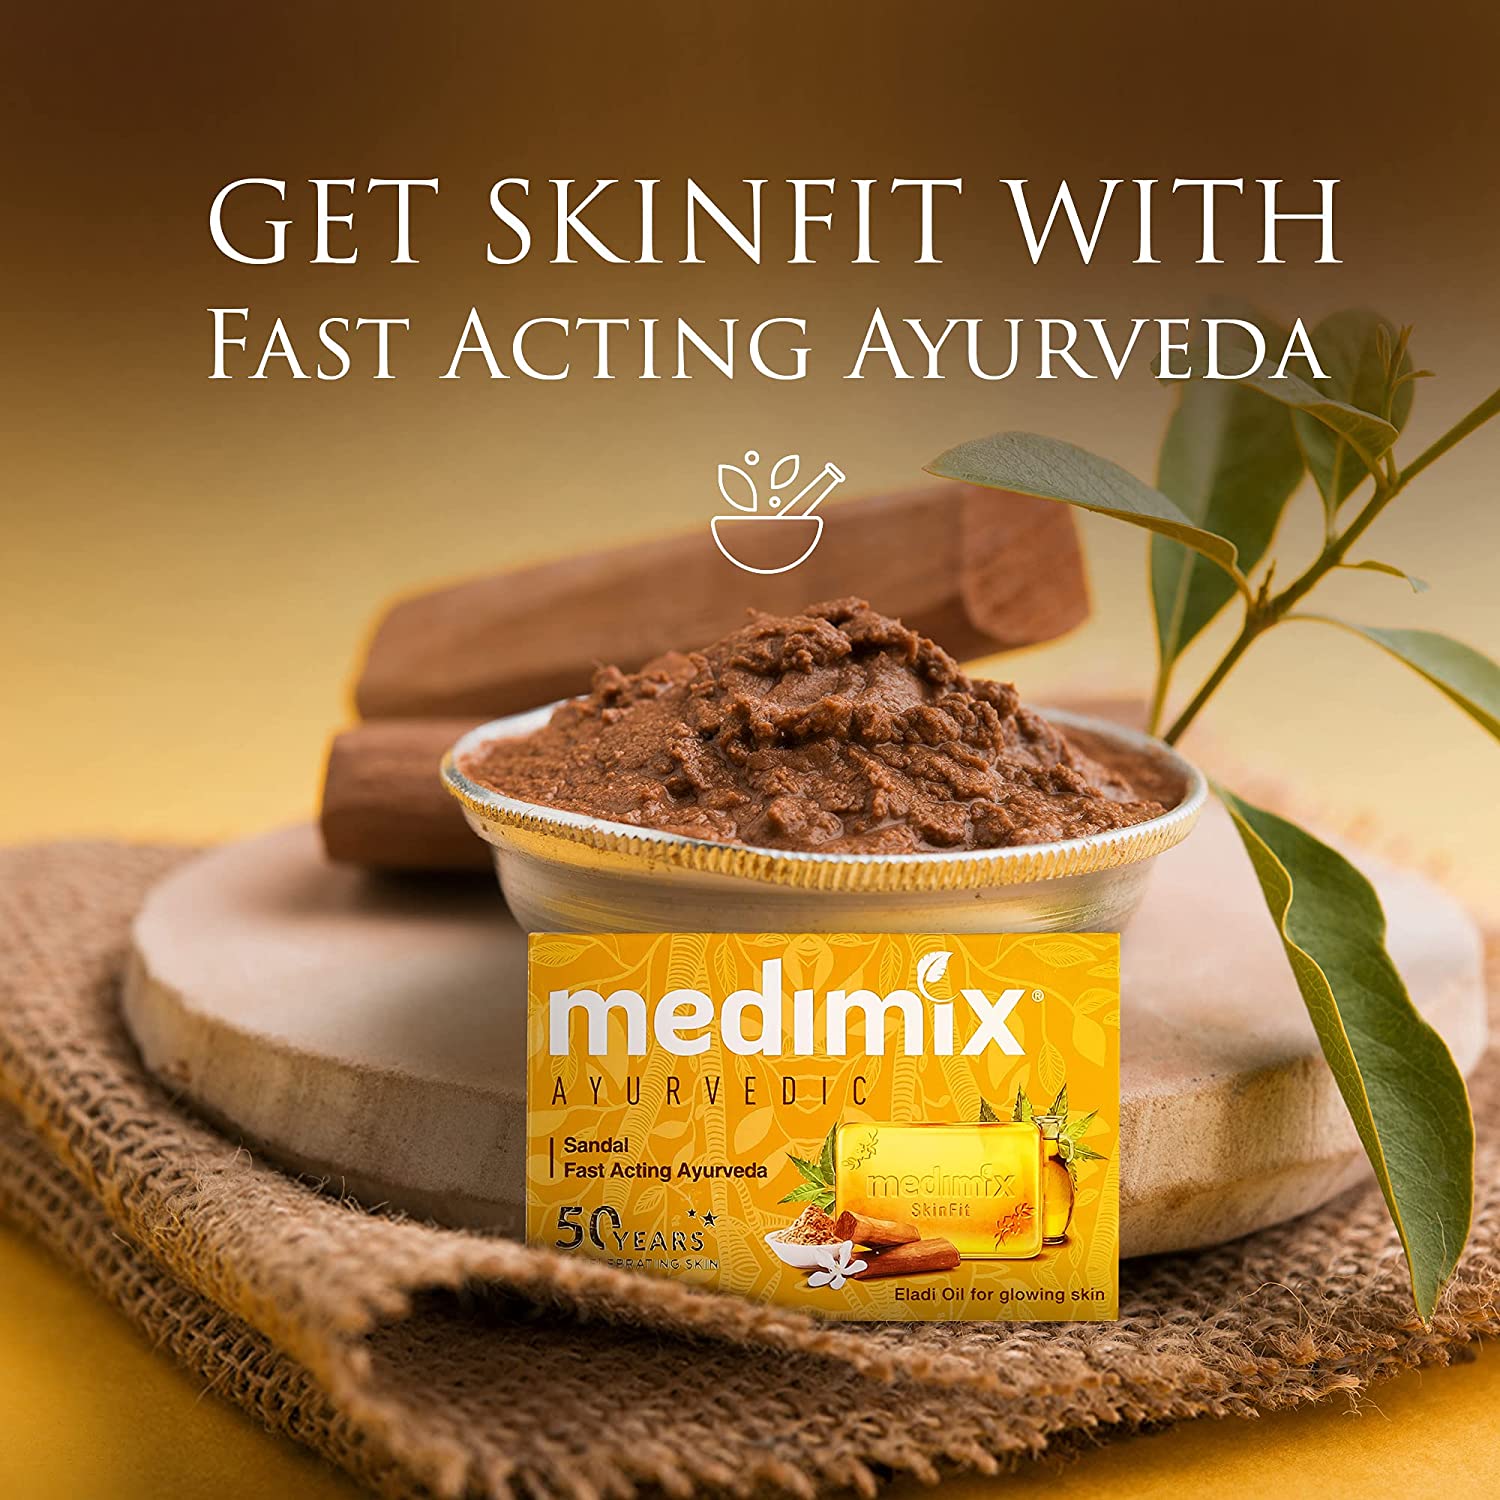 Medimix Ayurvedic Natural Glycerine Soap Review | All About Life - YouTube